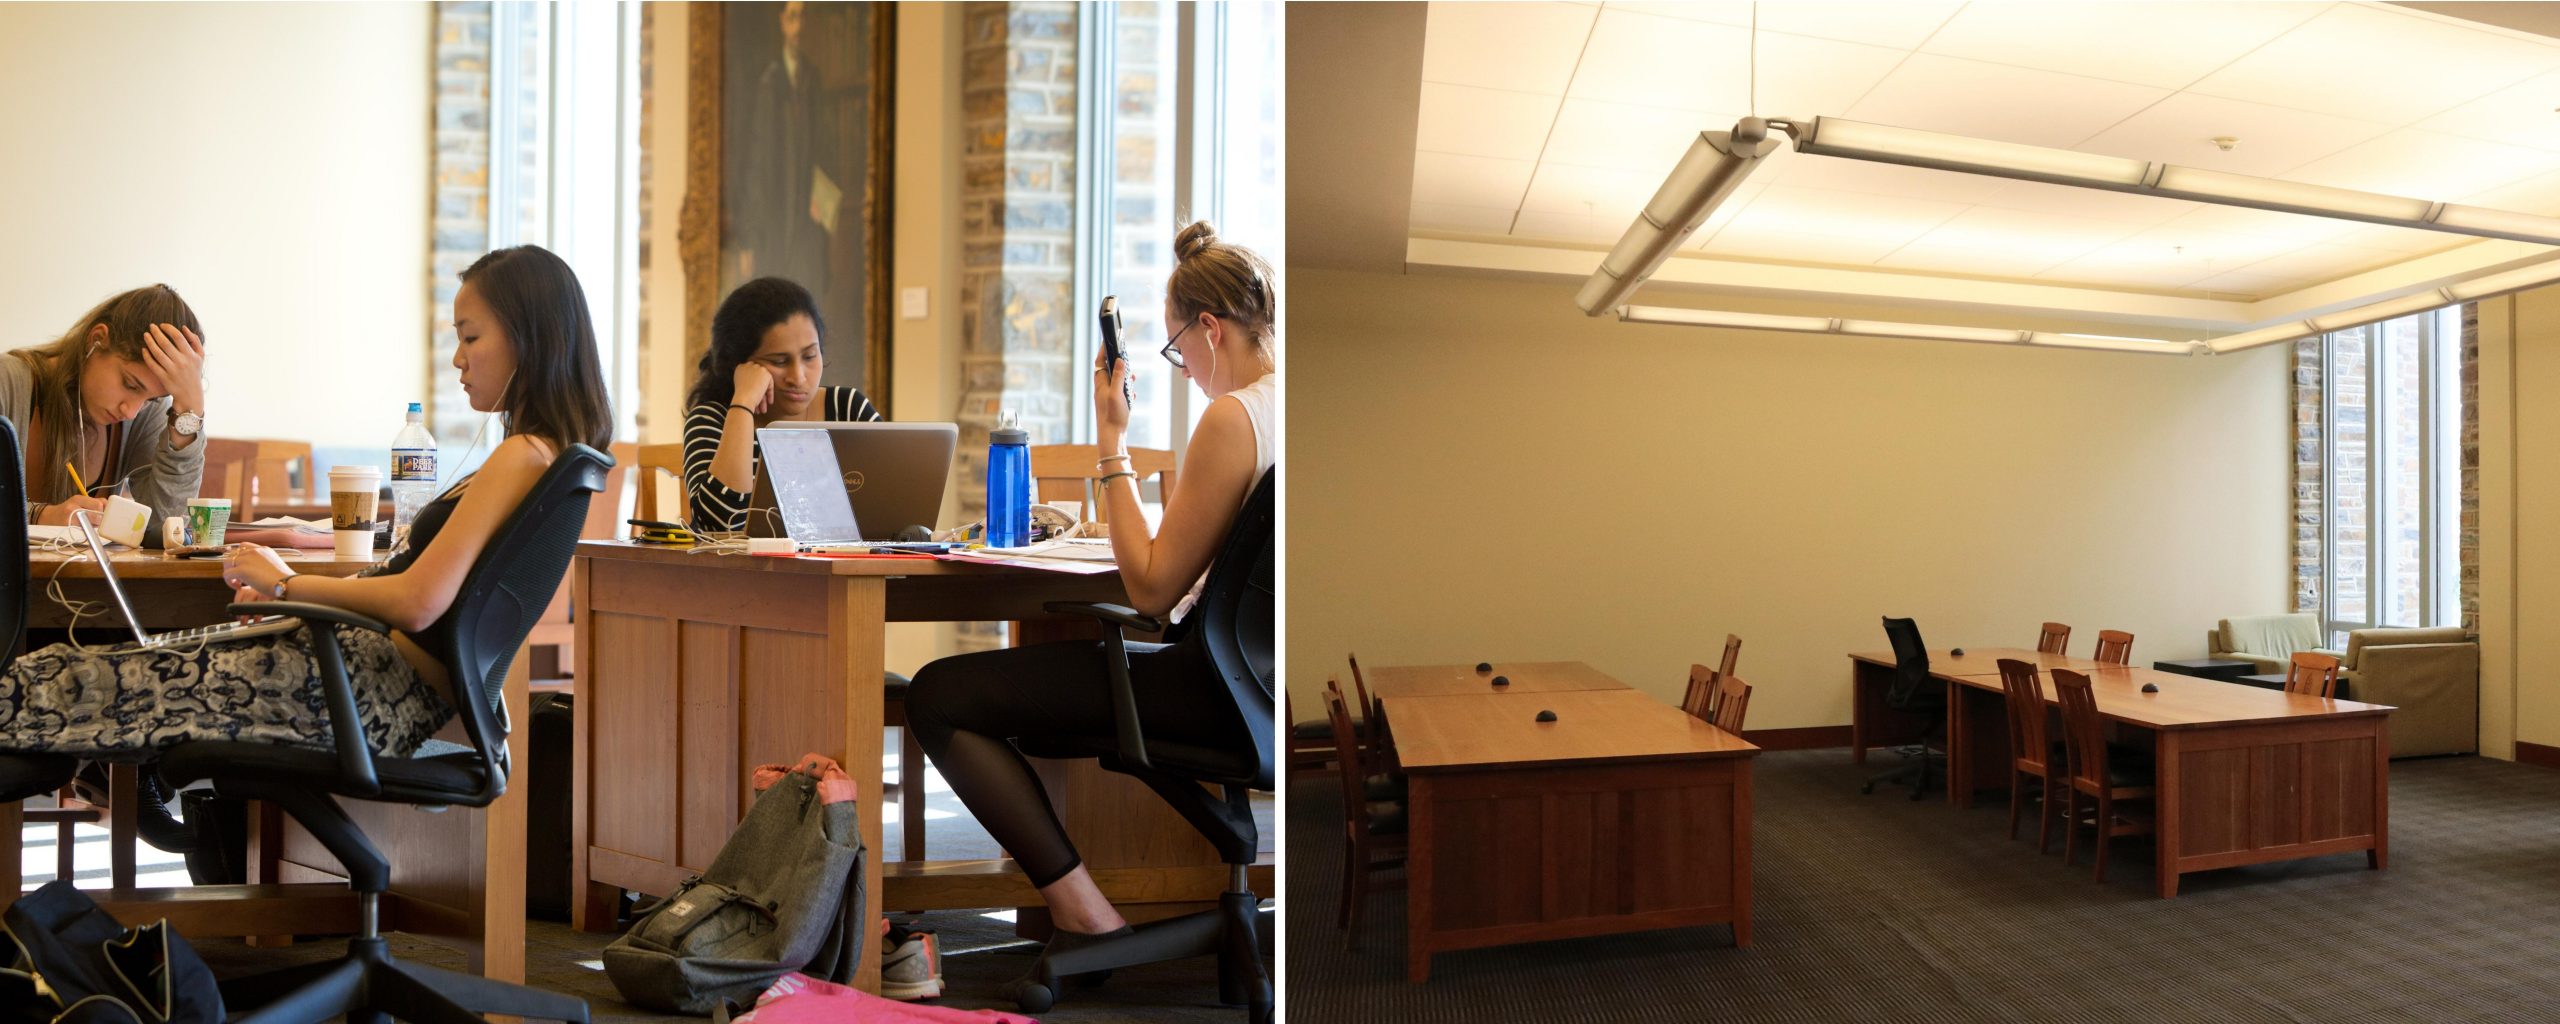 More study spaces in Perkins Library before and after